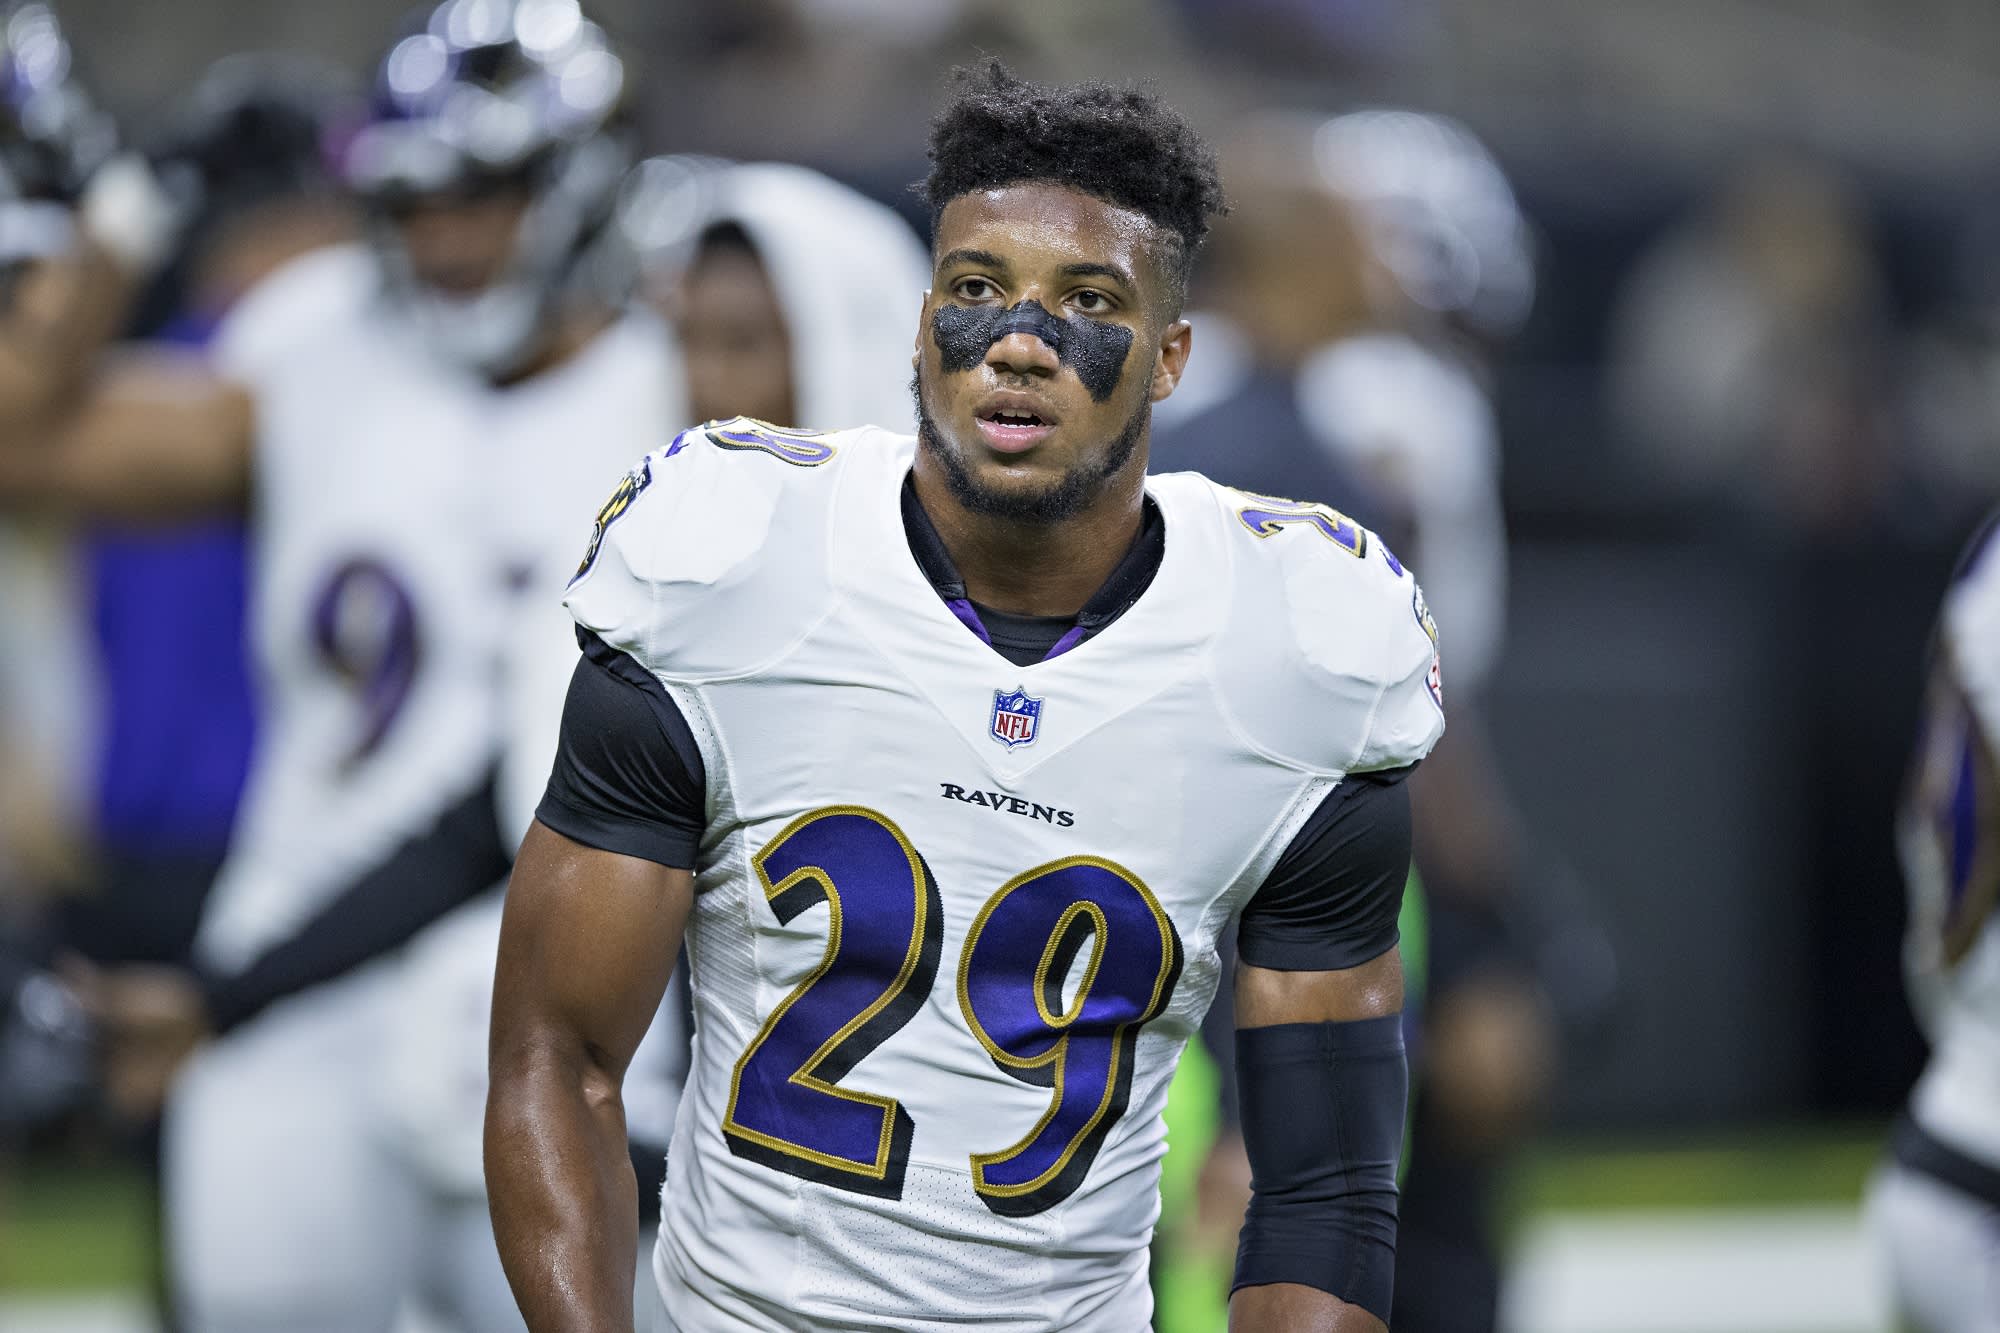 Why the NFL's Marlon Humphrey is moving 